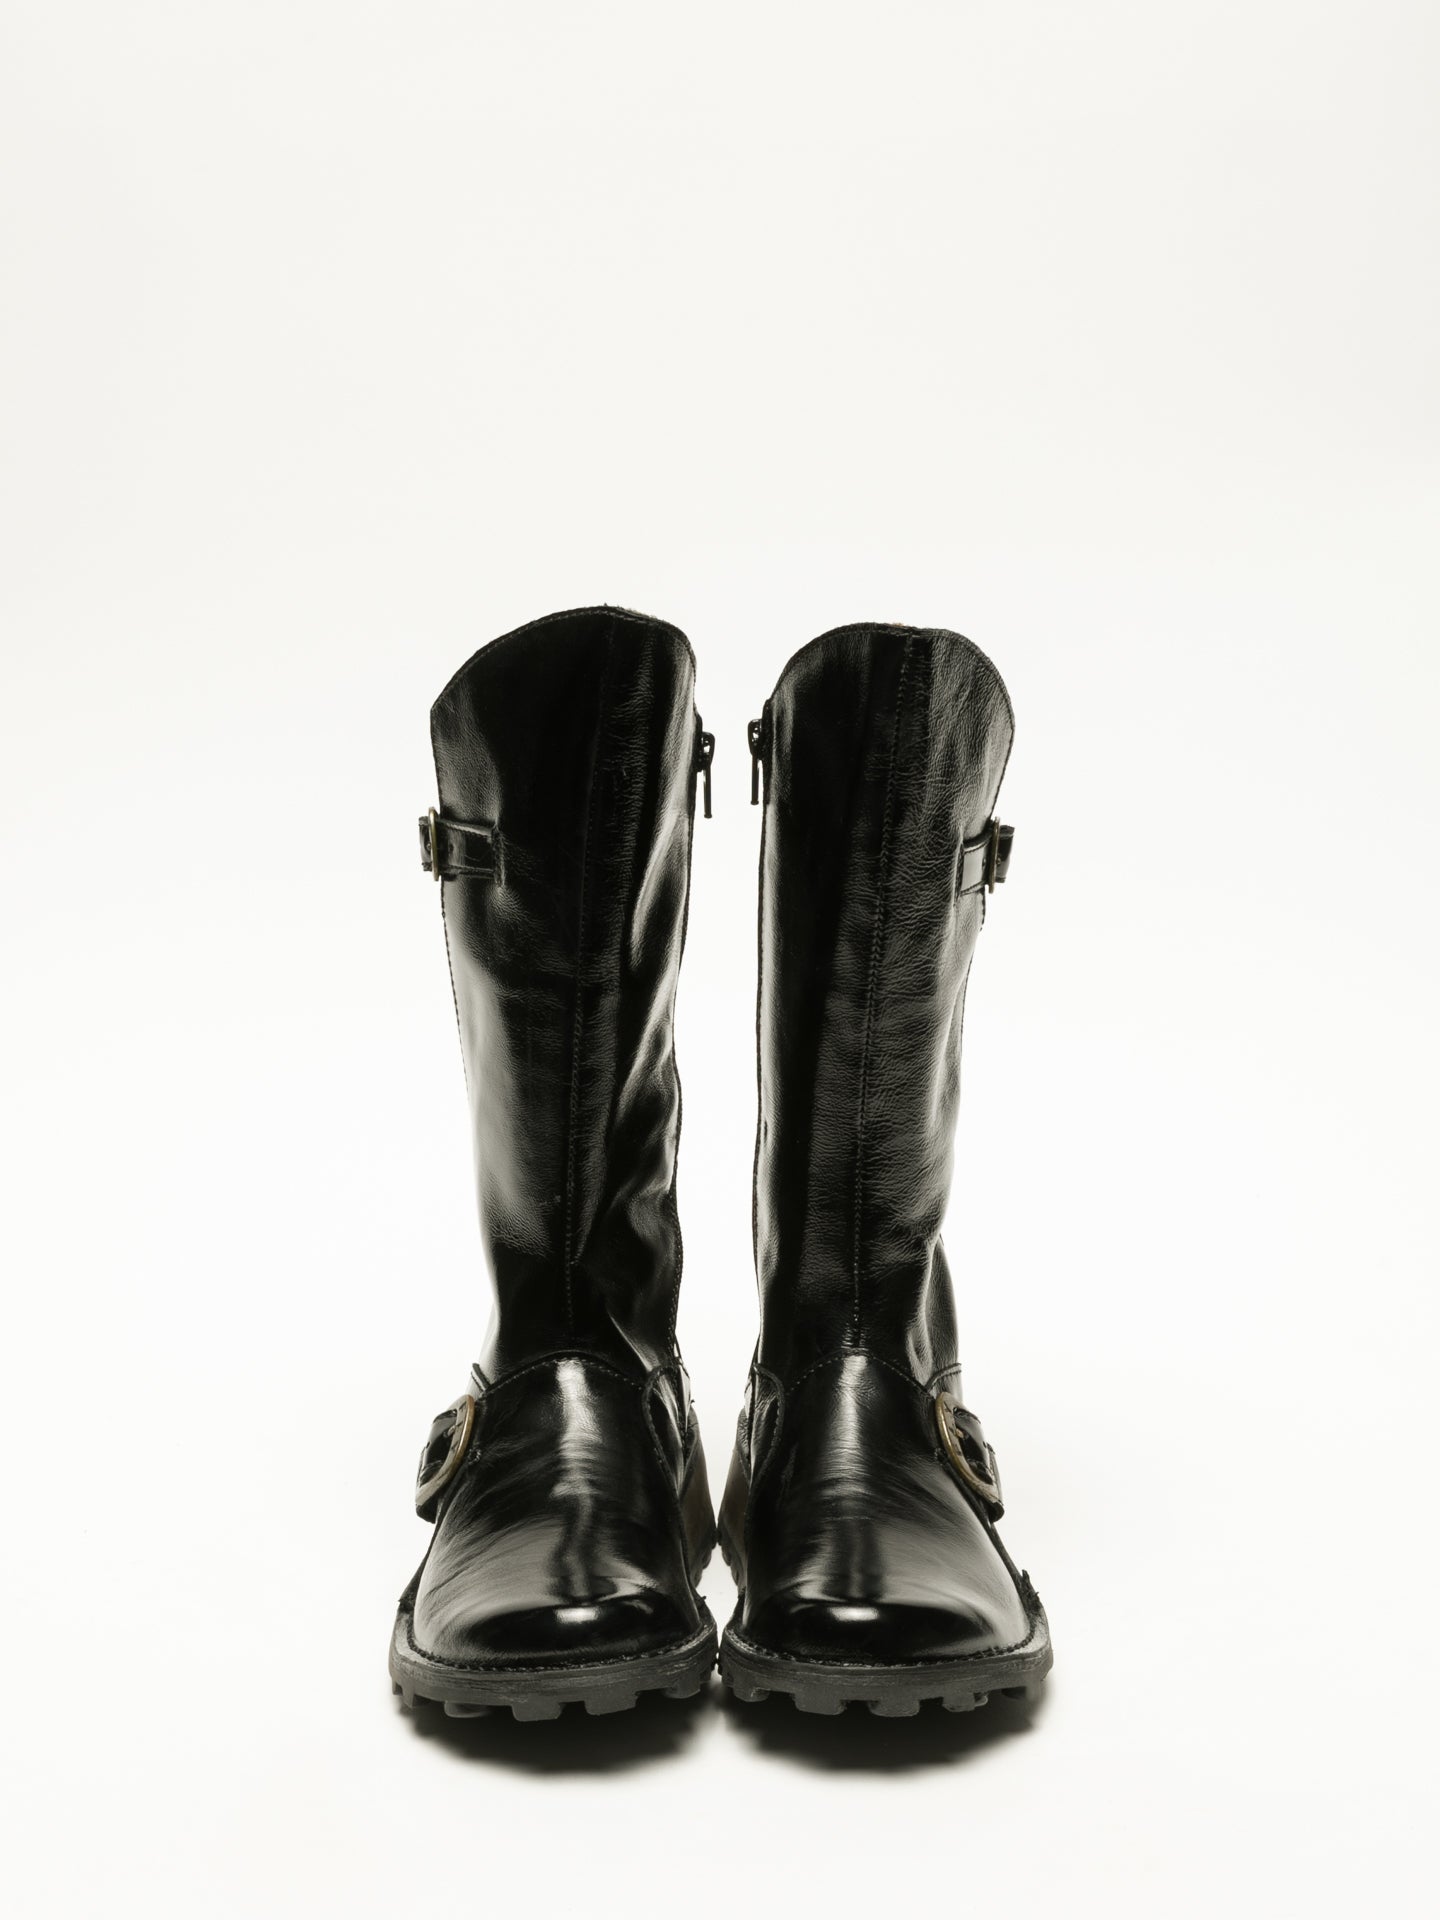 Fly London Coal Black Buckle Boots